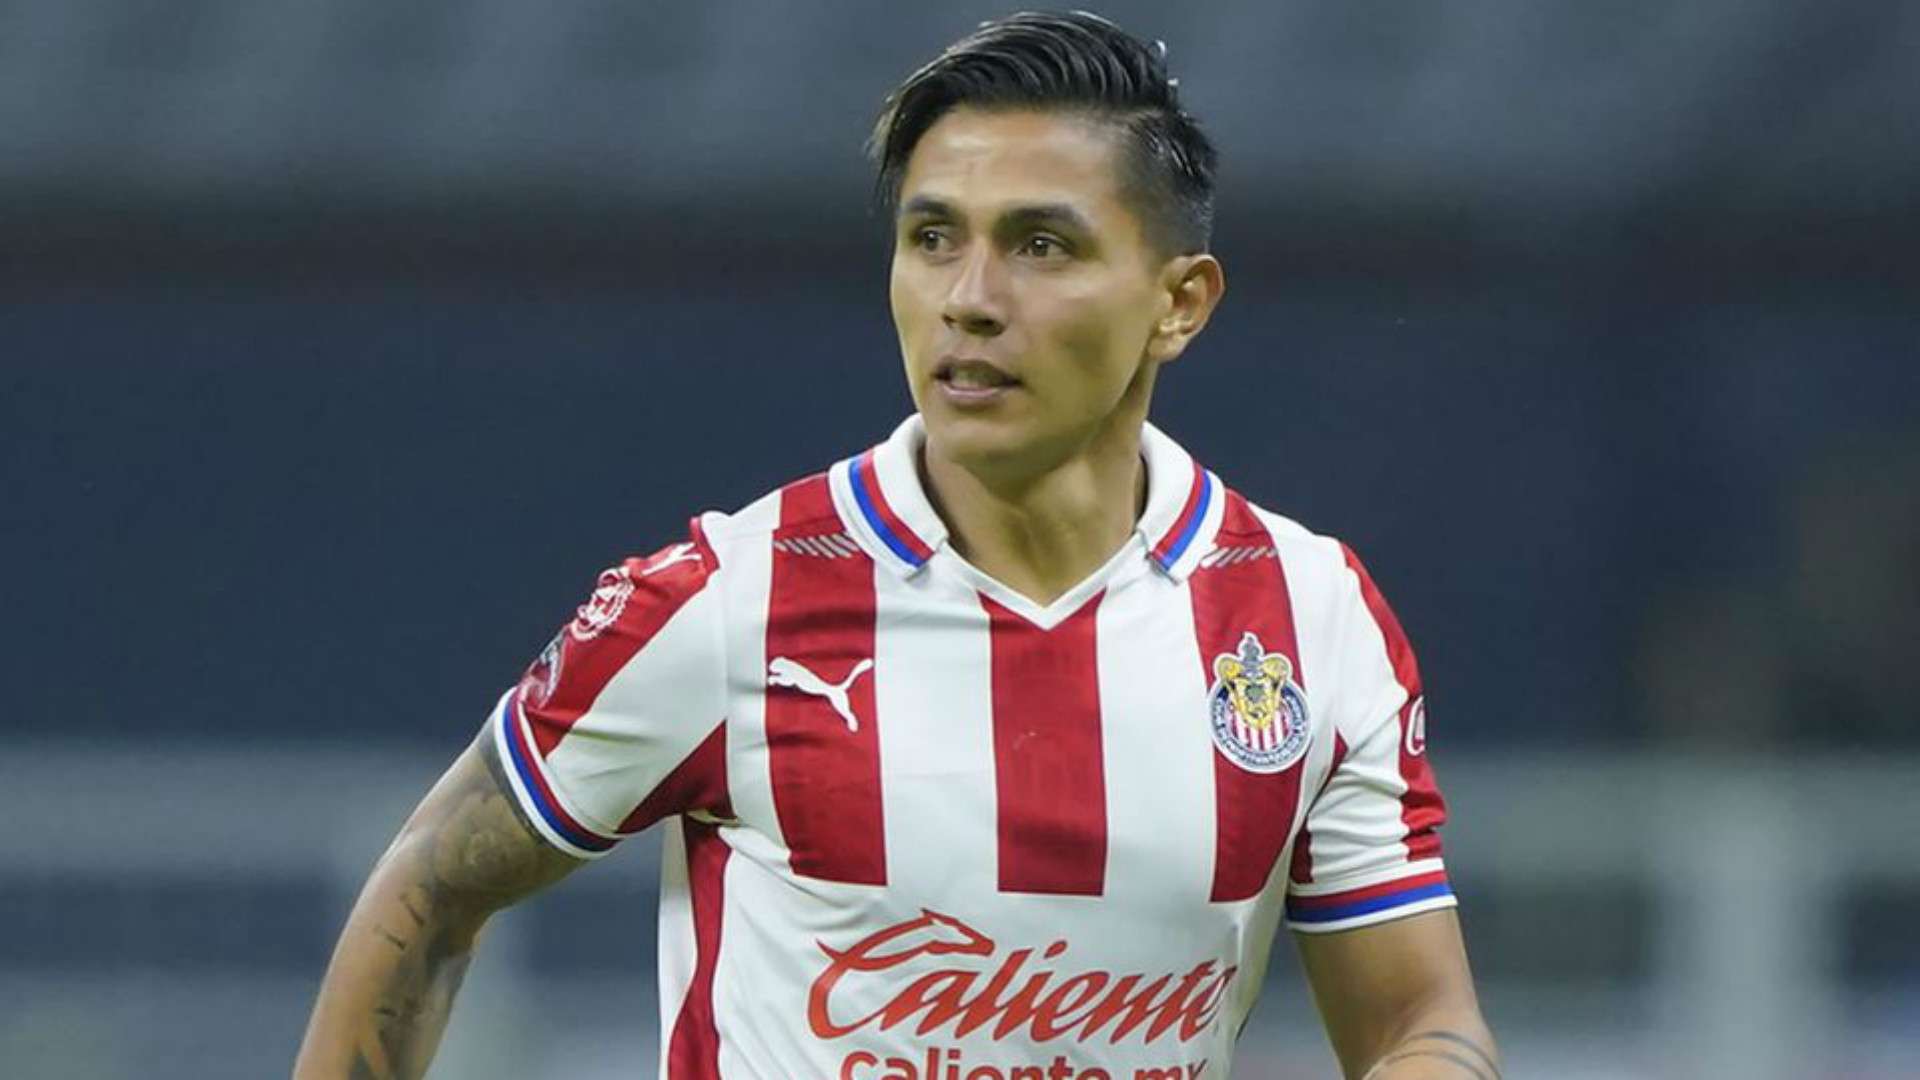 A legal problem could left out Dieter Villalpando and that accumulate another player that Guadalajara’s team will count on.